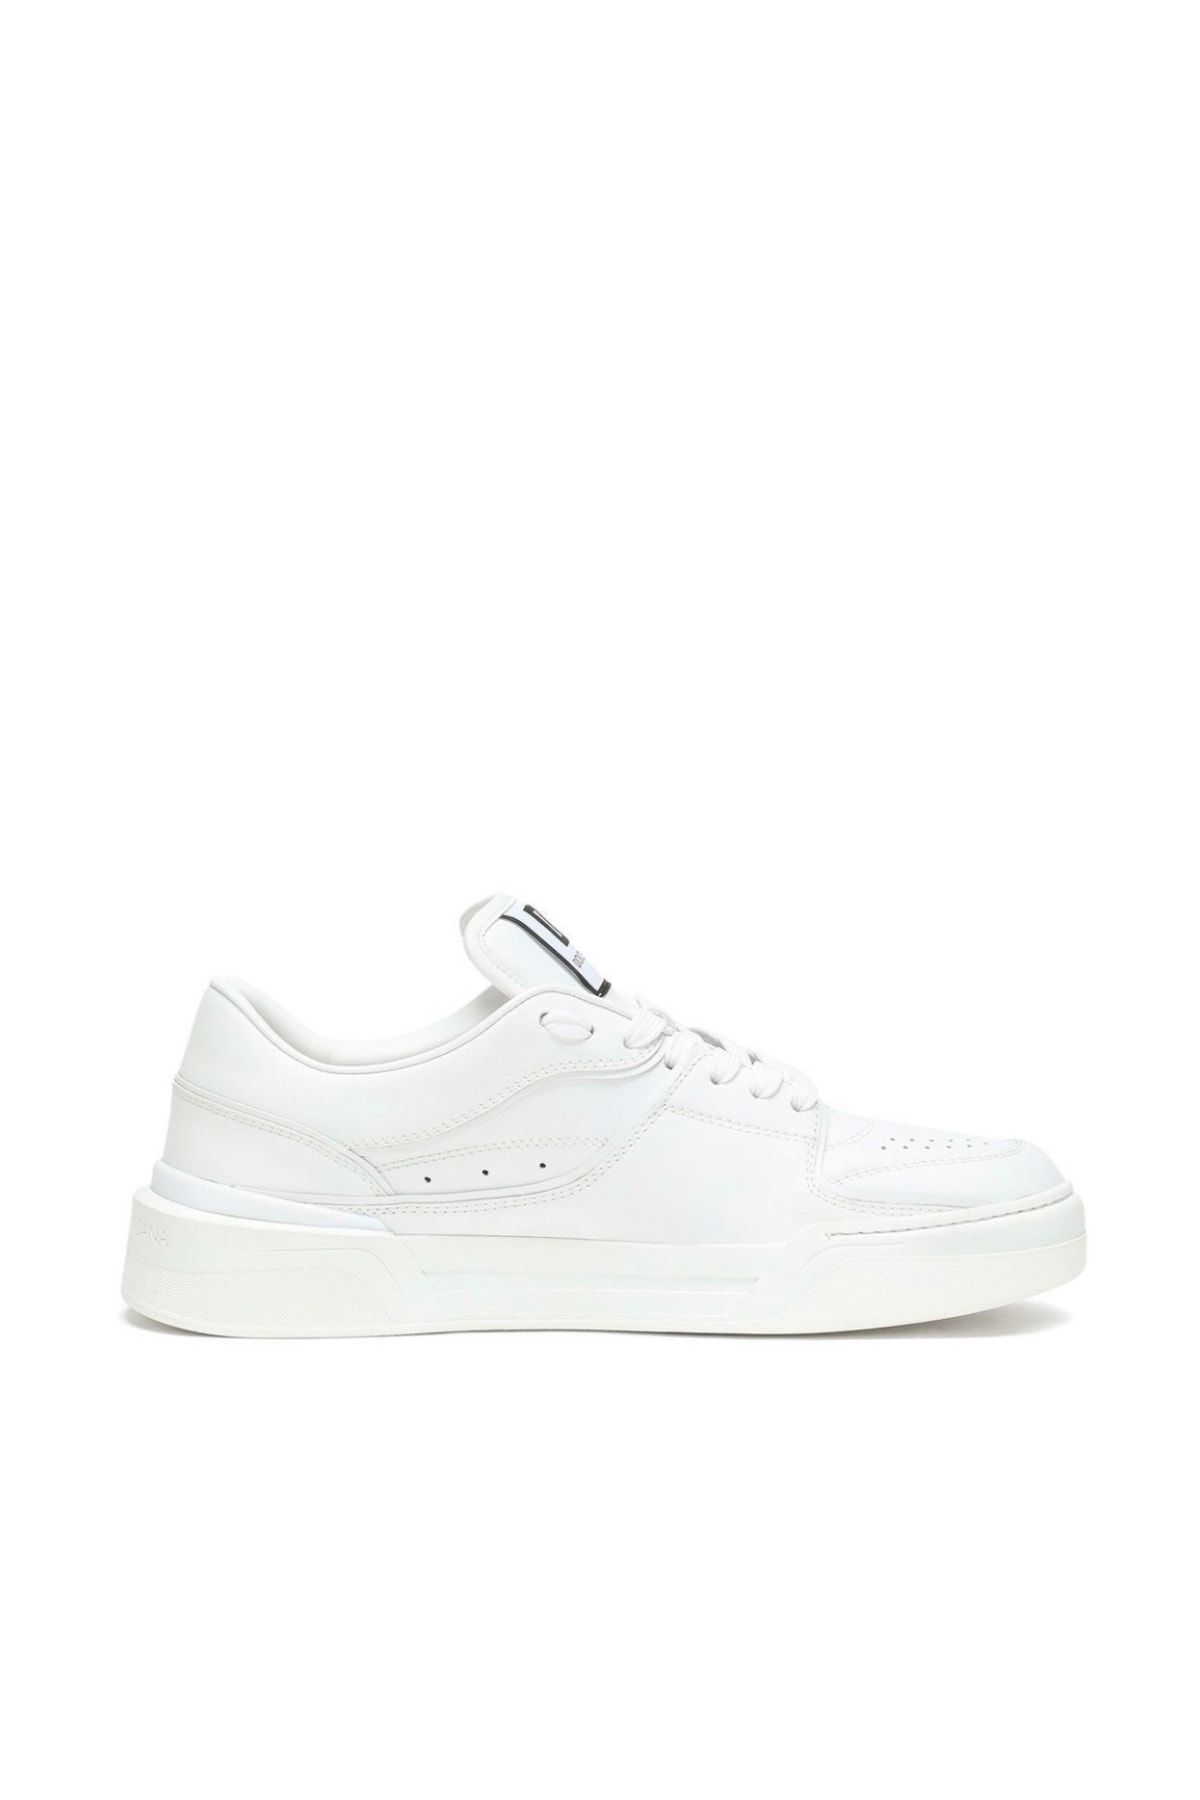 Dolce&Gabbana Roma Low-top Sneakers